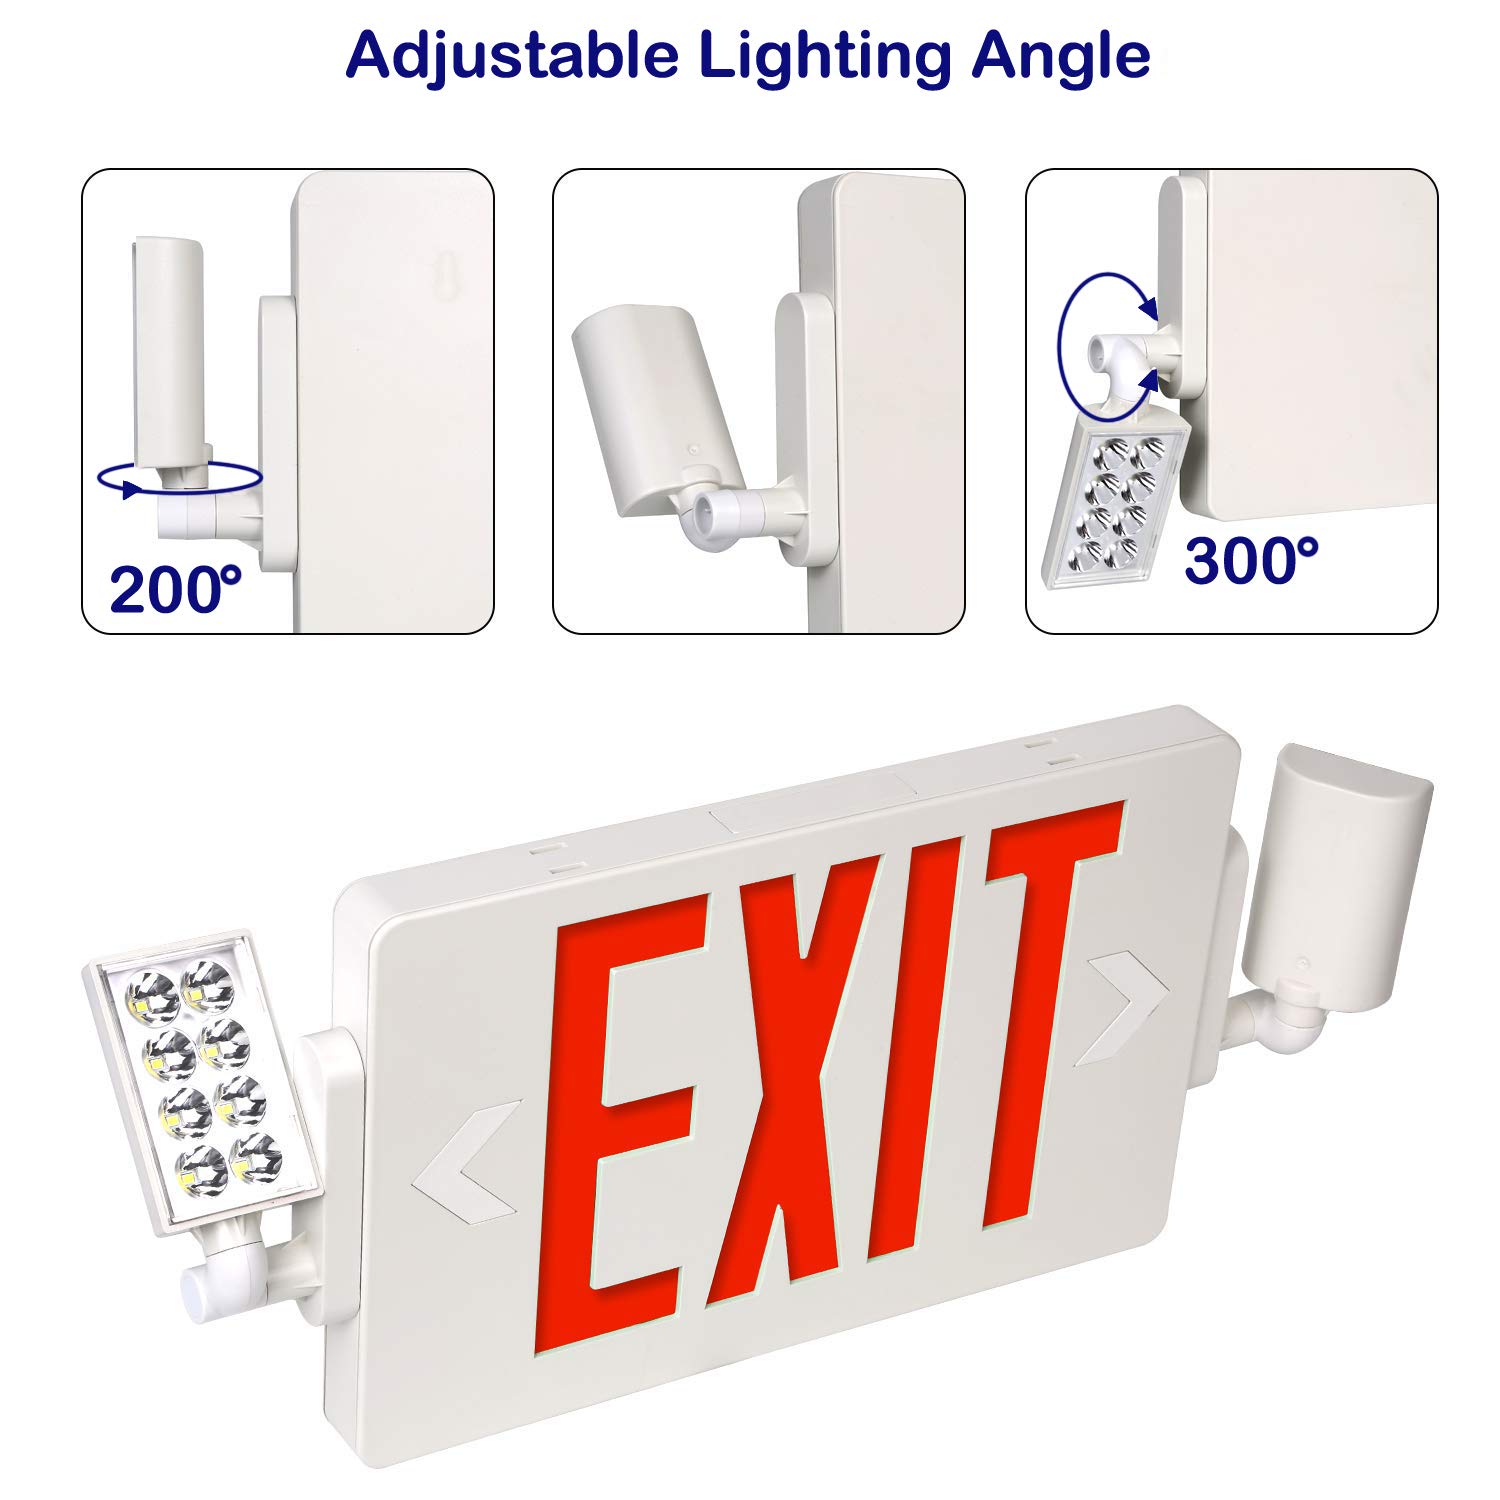 GRUENLICH LED Combo Emergency EXIT Sign with 2 Adjustable Head Lights and Double Face, Back Up Batteries- US Standard Red Letter Emergency Exit Lighting, UL 924 Qualified, 120-277 Voltage (4-Pack)